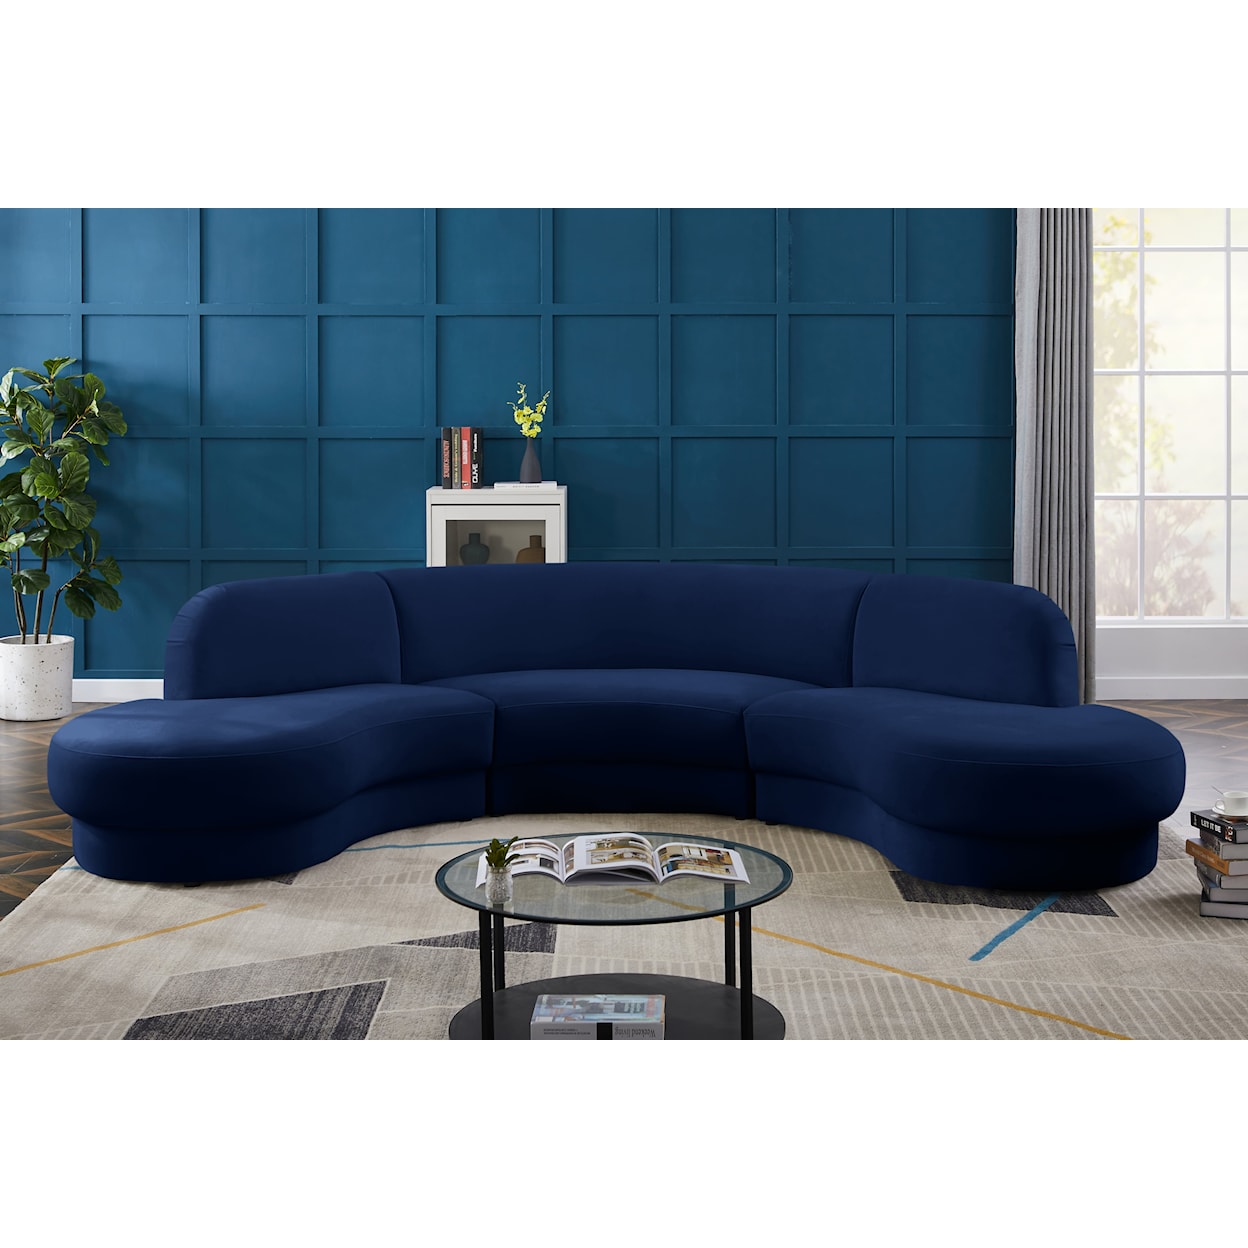 Meridian Furniture Rosa 3pc. Sectional (3 Boxes)